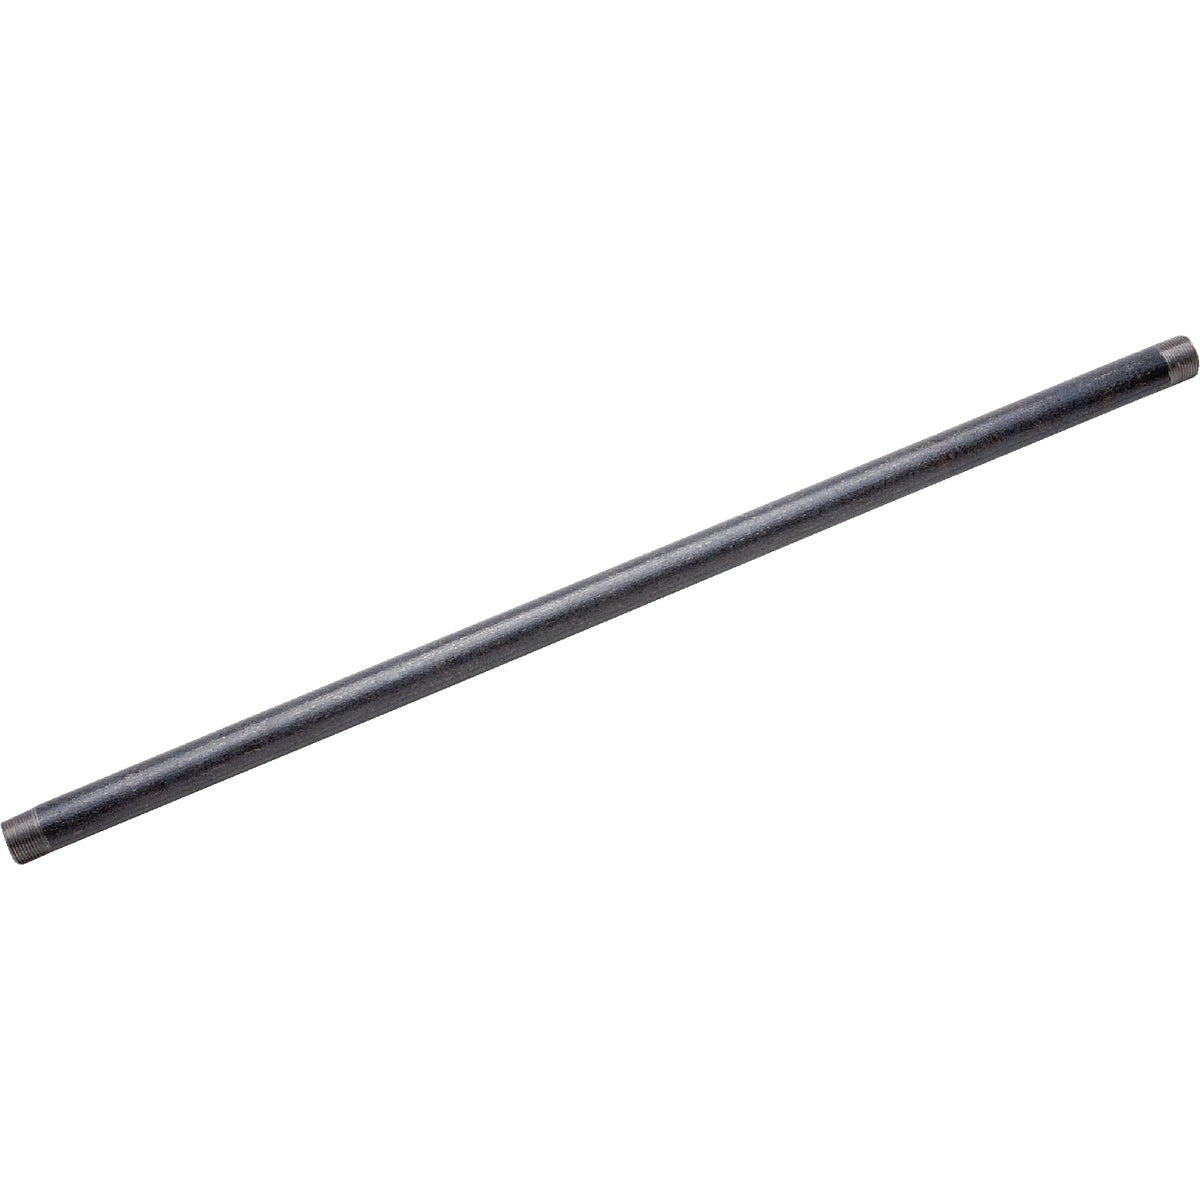 Item 400609, Domestic. Standard black pipe. Threaded both ends. Schedule 40.